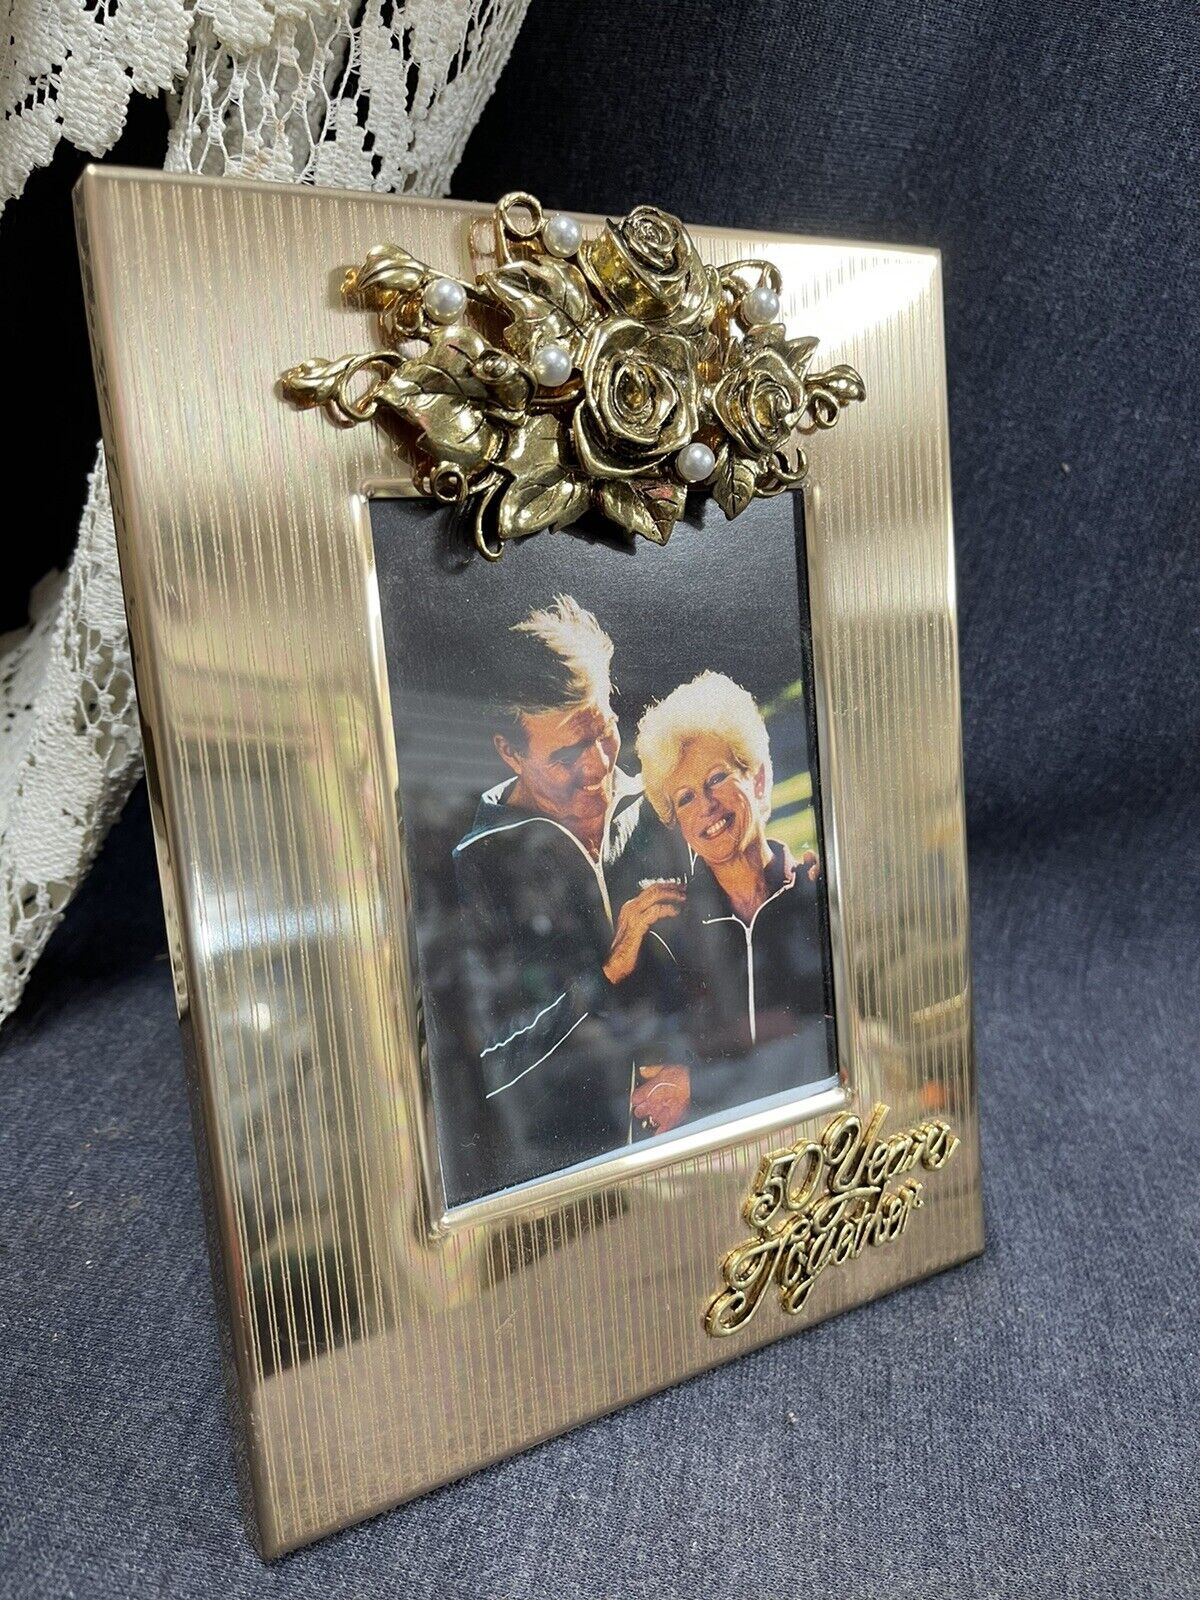 Vintage Golden Anniversary Picture Frame 50 Years Together 8”x6” Musical